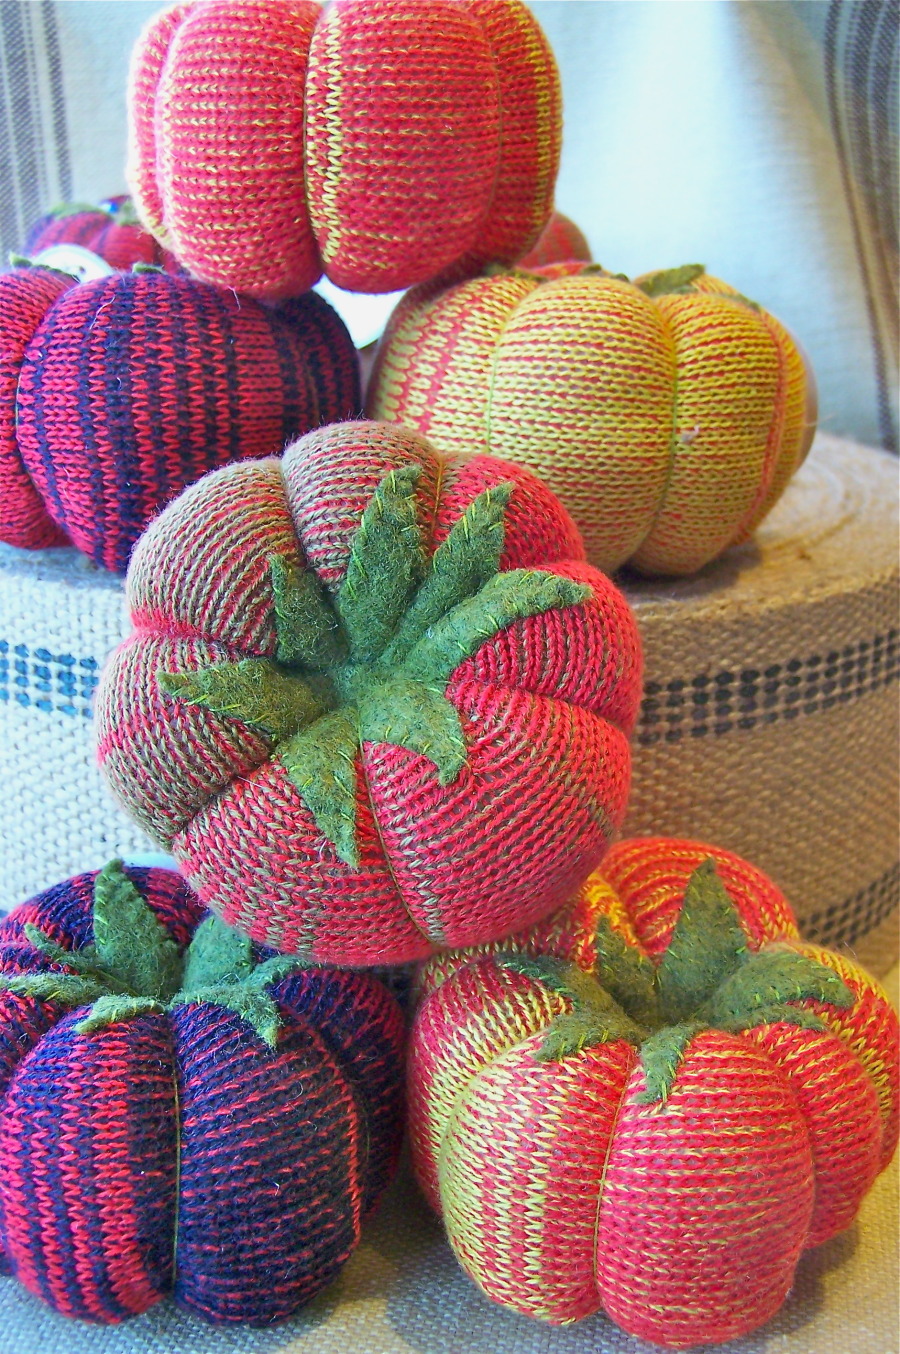 Pincushions By Bettyturbo Sewing Fabric Retro Tomato Pincushions on Pattern Paper Cotton Fabric By The Yard With Spoonflower